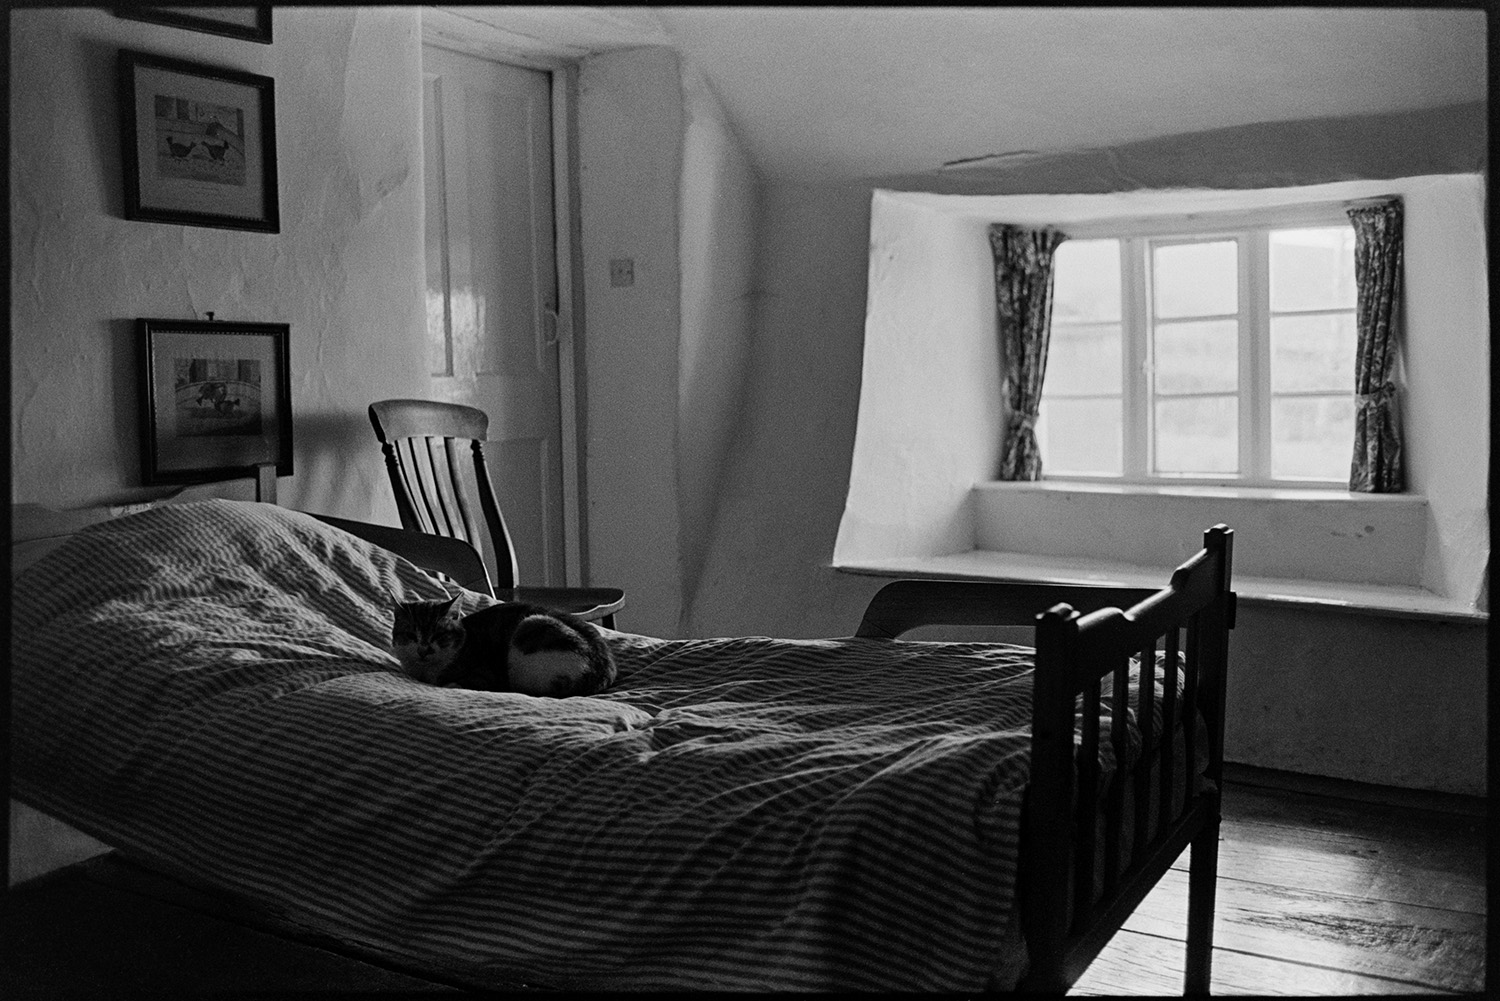 Farmhouse used as creative writing centre. 
[A cat sat on a bed at the Arvon centre at Totleigh Barton, Sheepwash. Pictures are also hung on the wall of the bedroom. The farmhouse was used as a creative writing centre.]